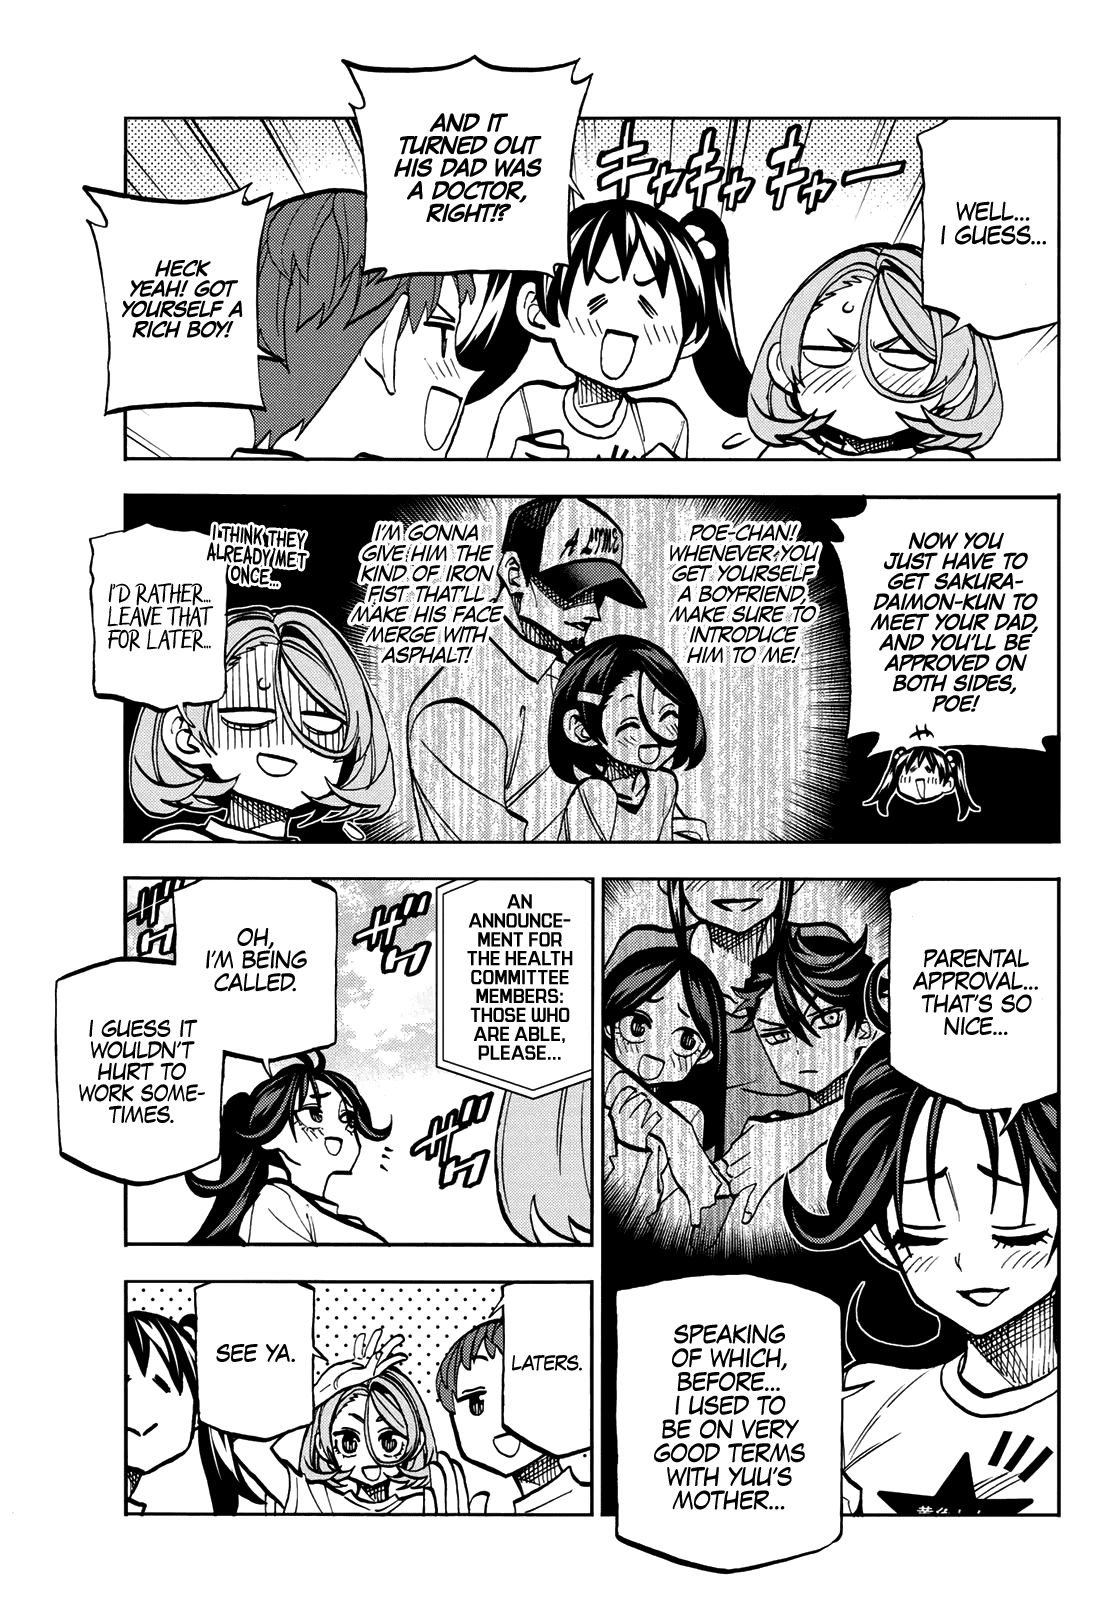 The Story Between A Dumb Prefect And A High School Girl With An Inappropriate Skirt Length - Page 3